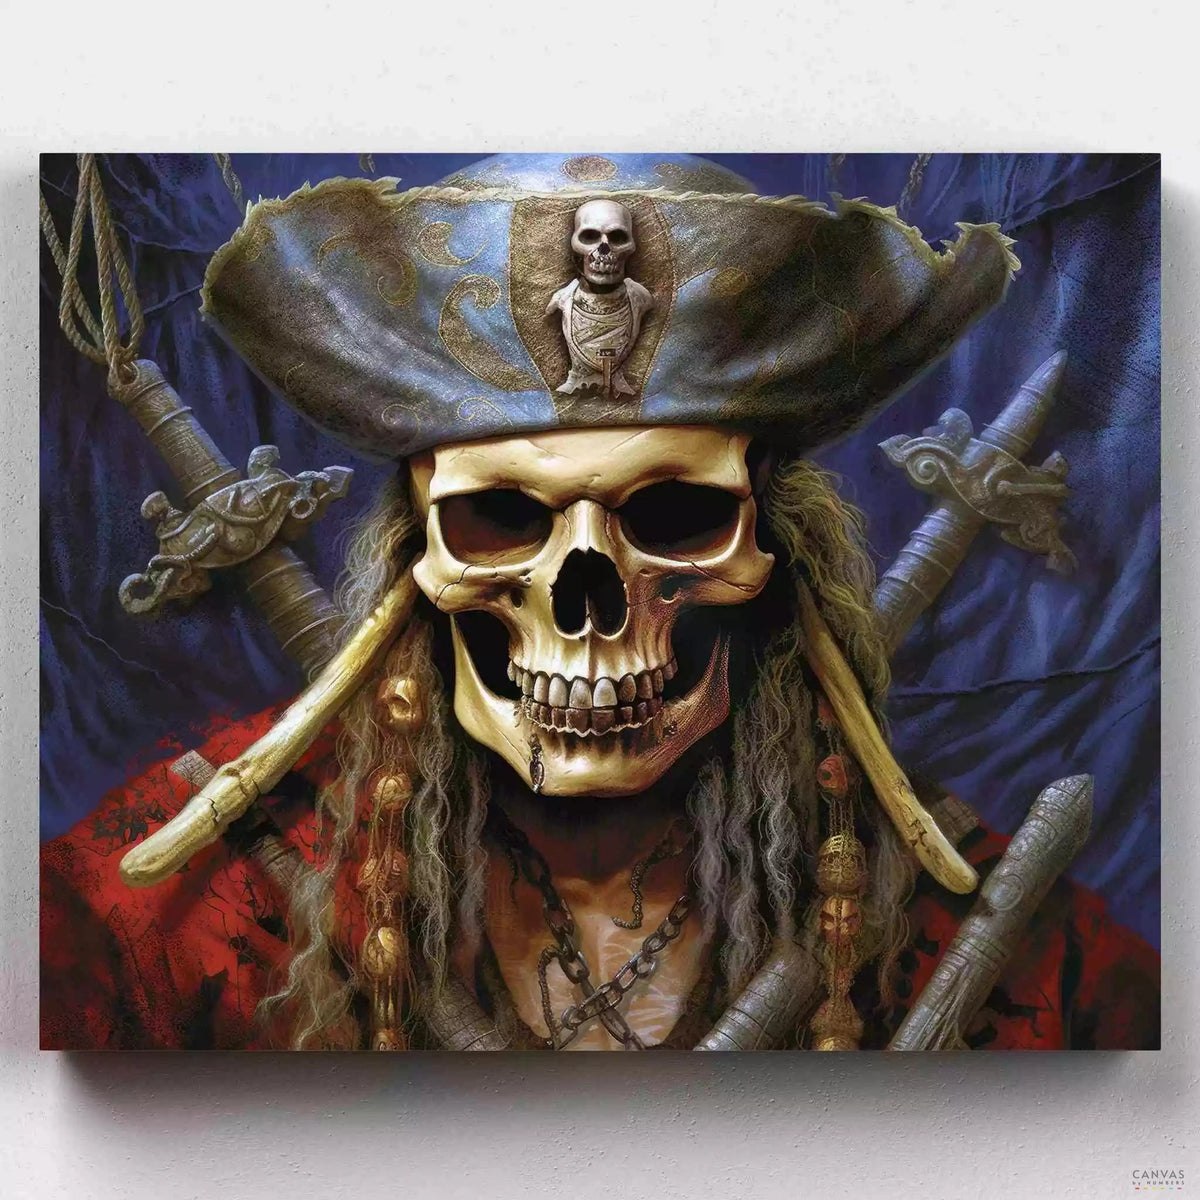 The Pirate King - Paint by Numbers-Paint by Numbers-16"x20" (40x50cm) No Frame-Canvas by Numbers US